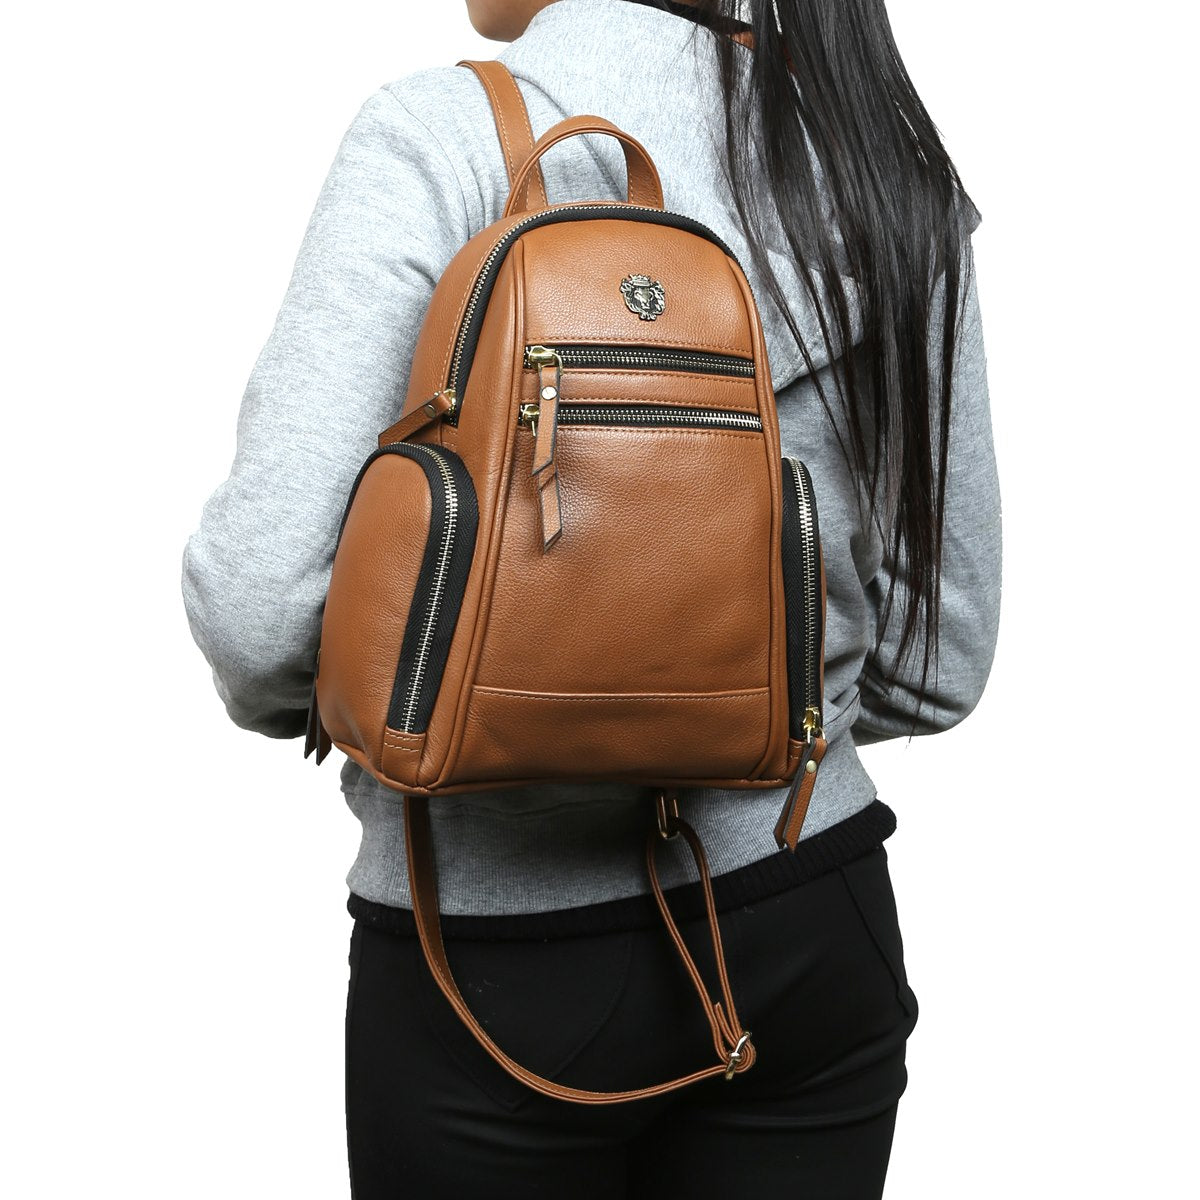 Buy Leather Backpack, Leather Rucksack, Tan Leather Backpack Purse for  Women Online in India - Etsy